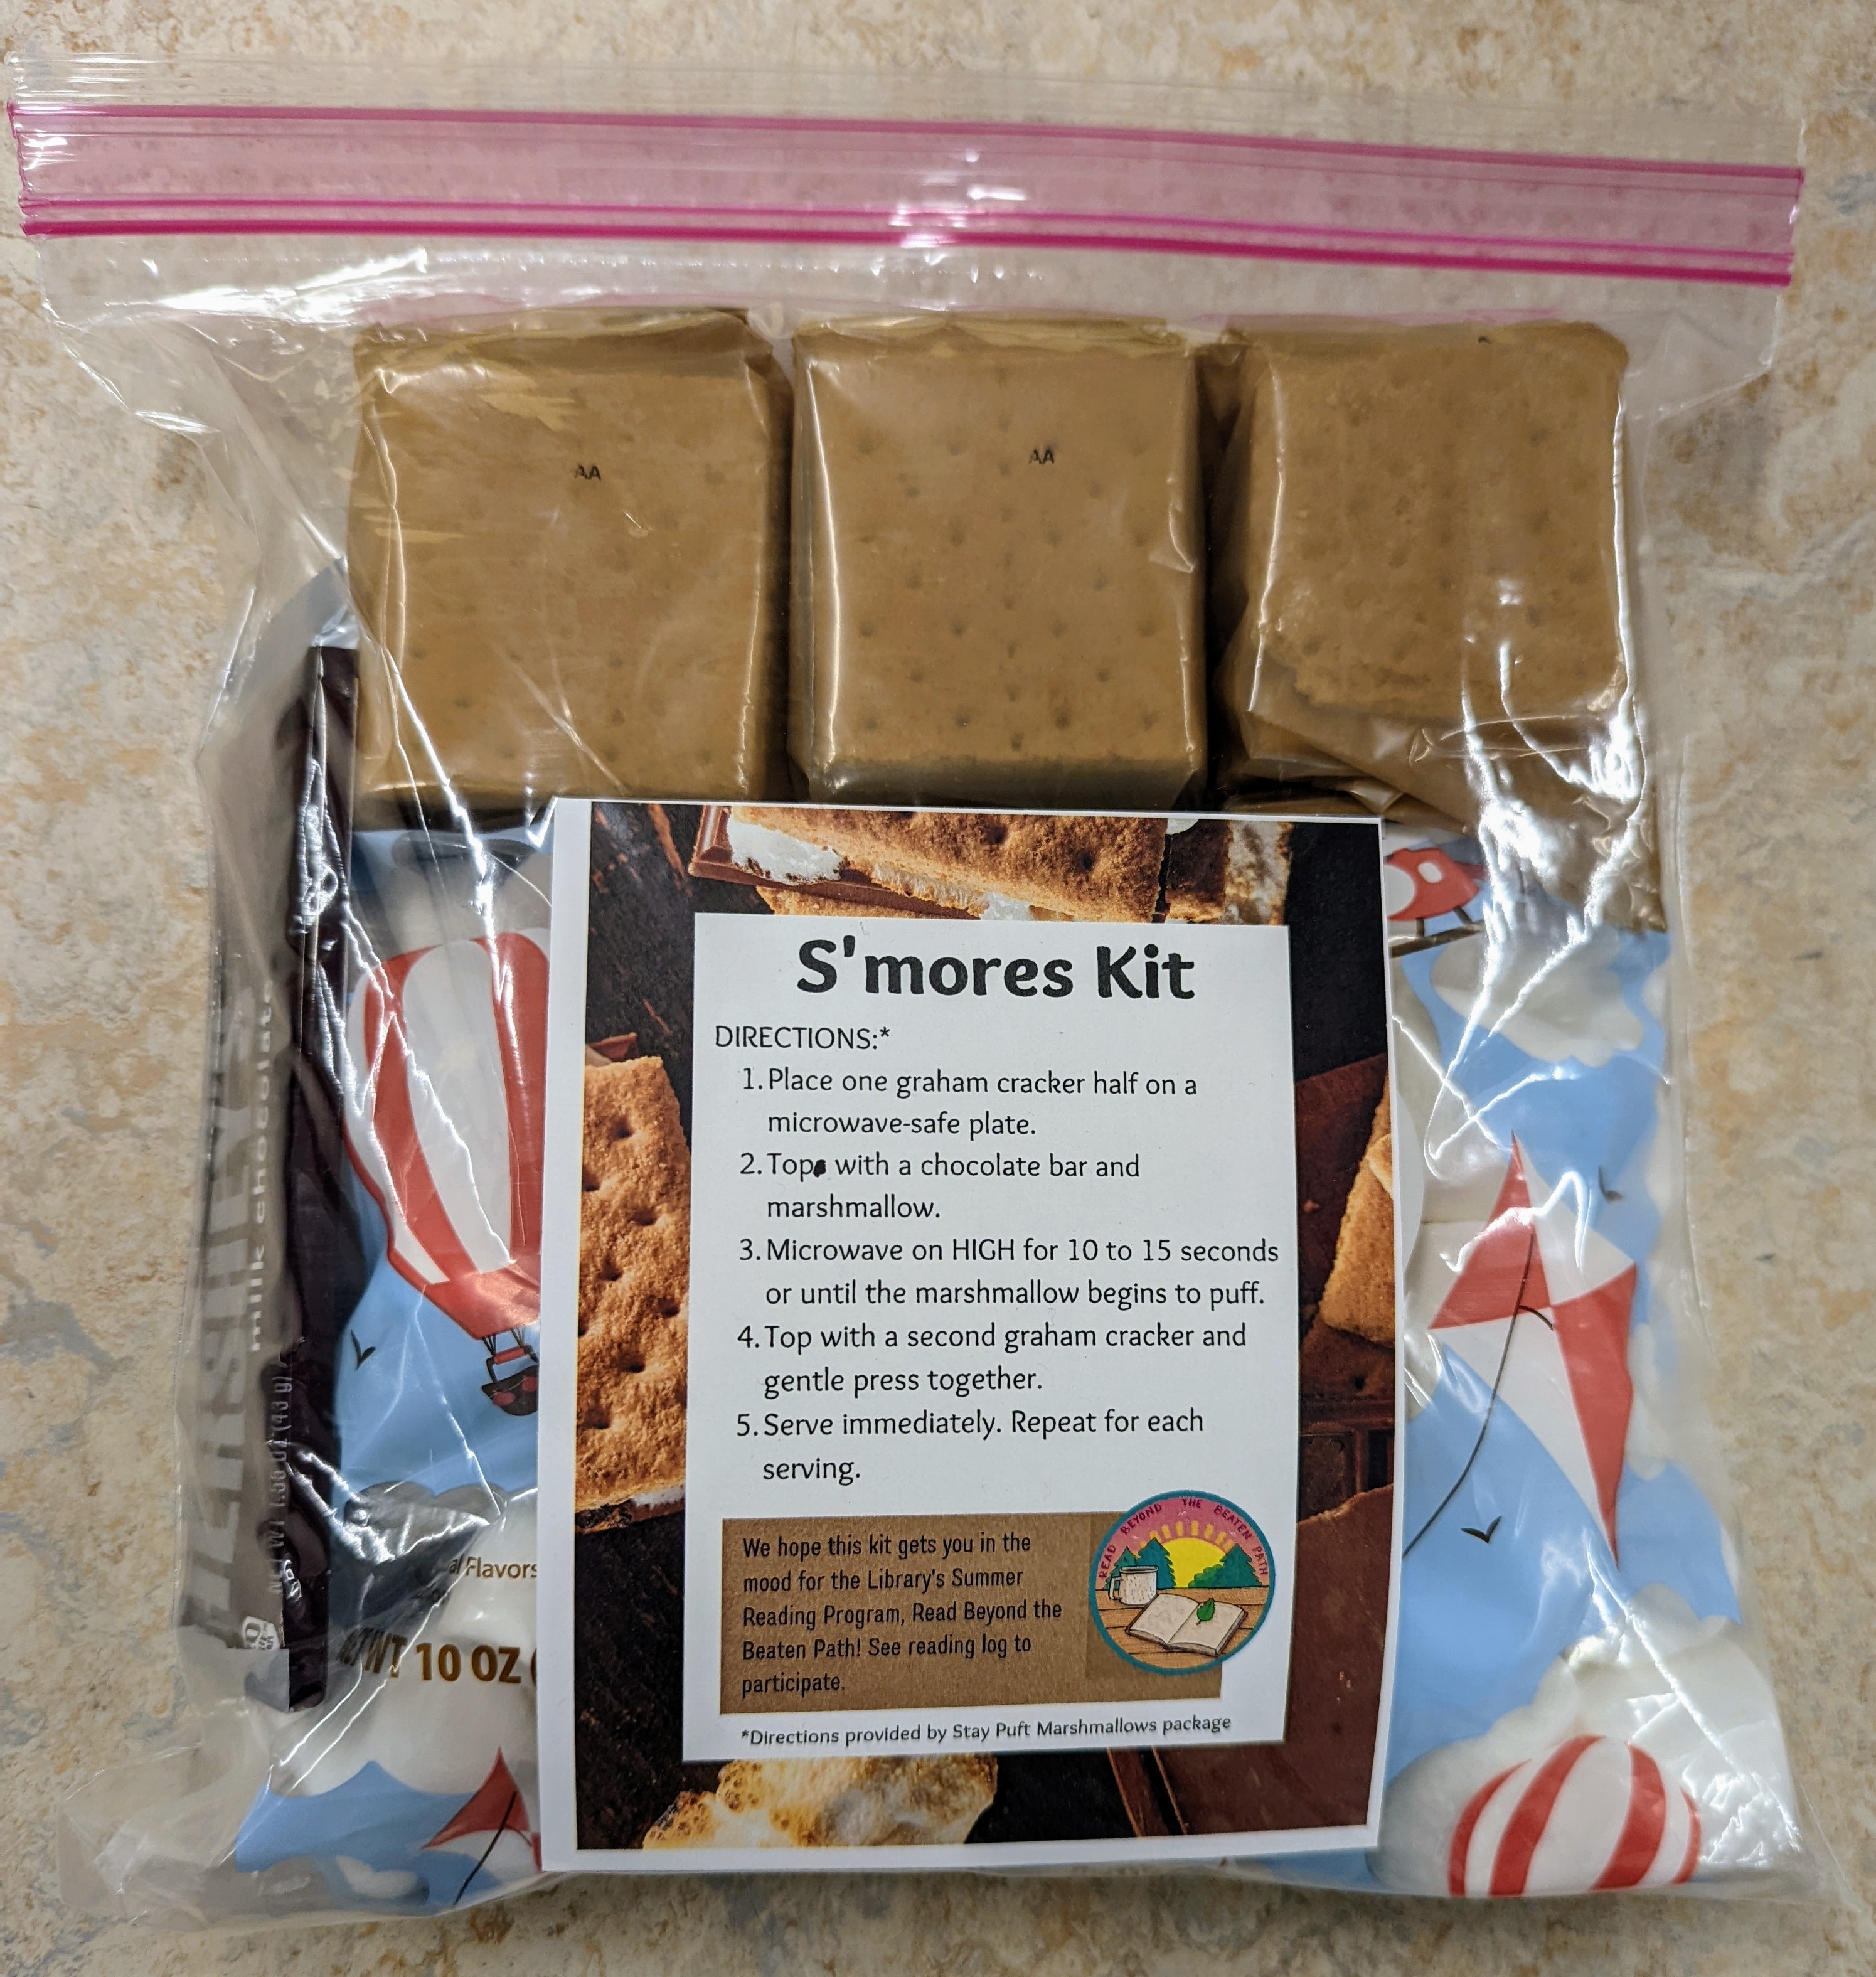 S'mores kit image